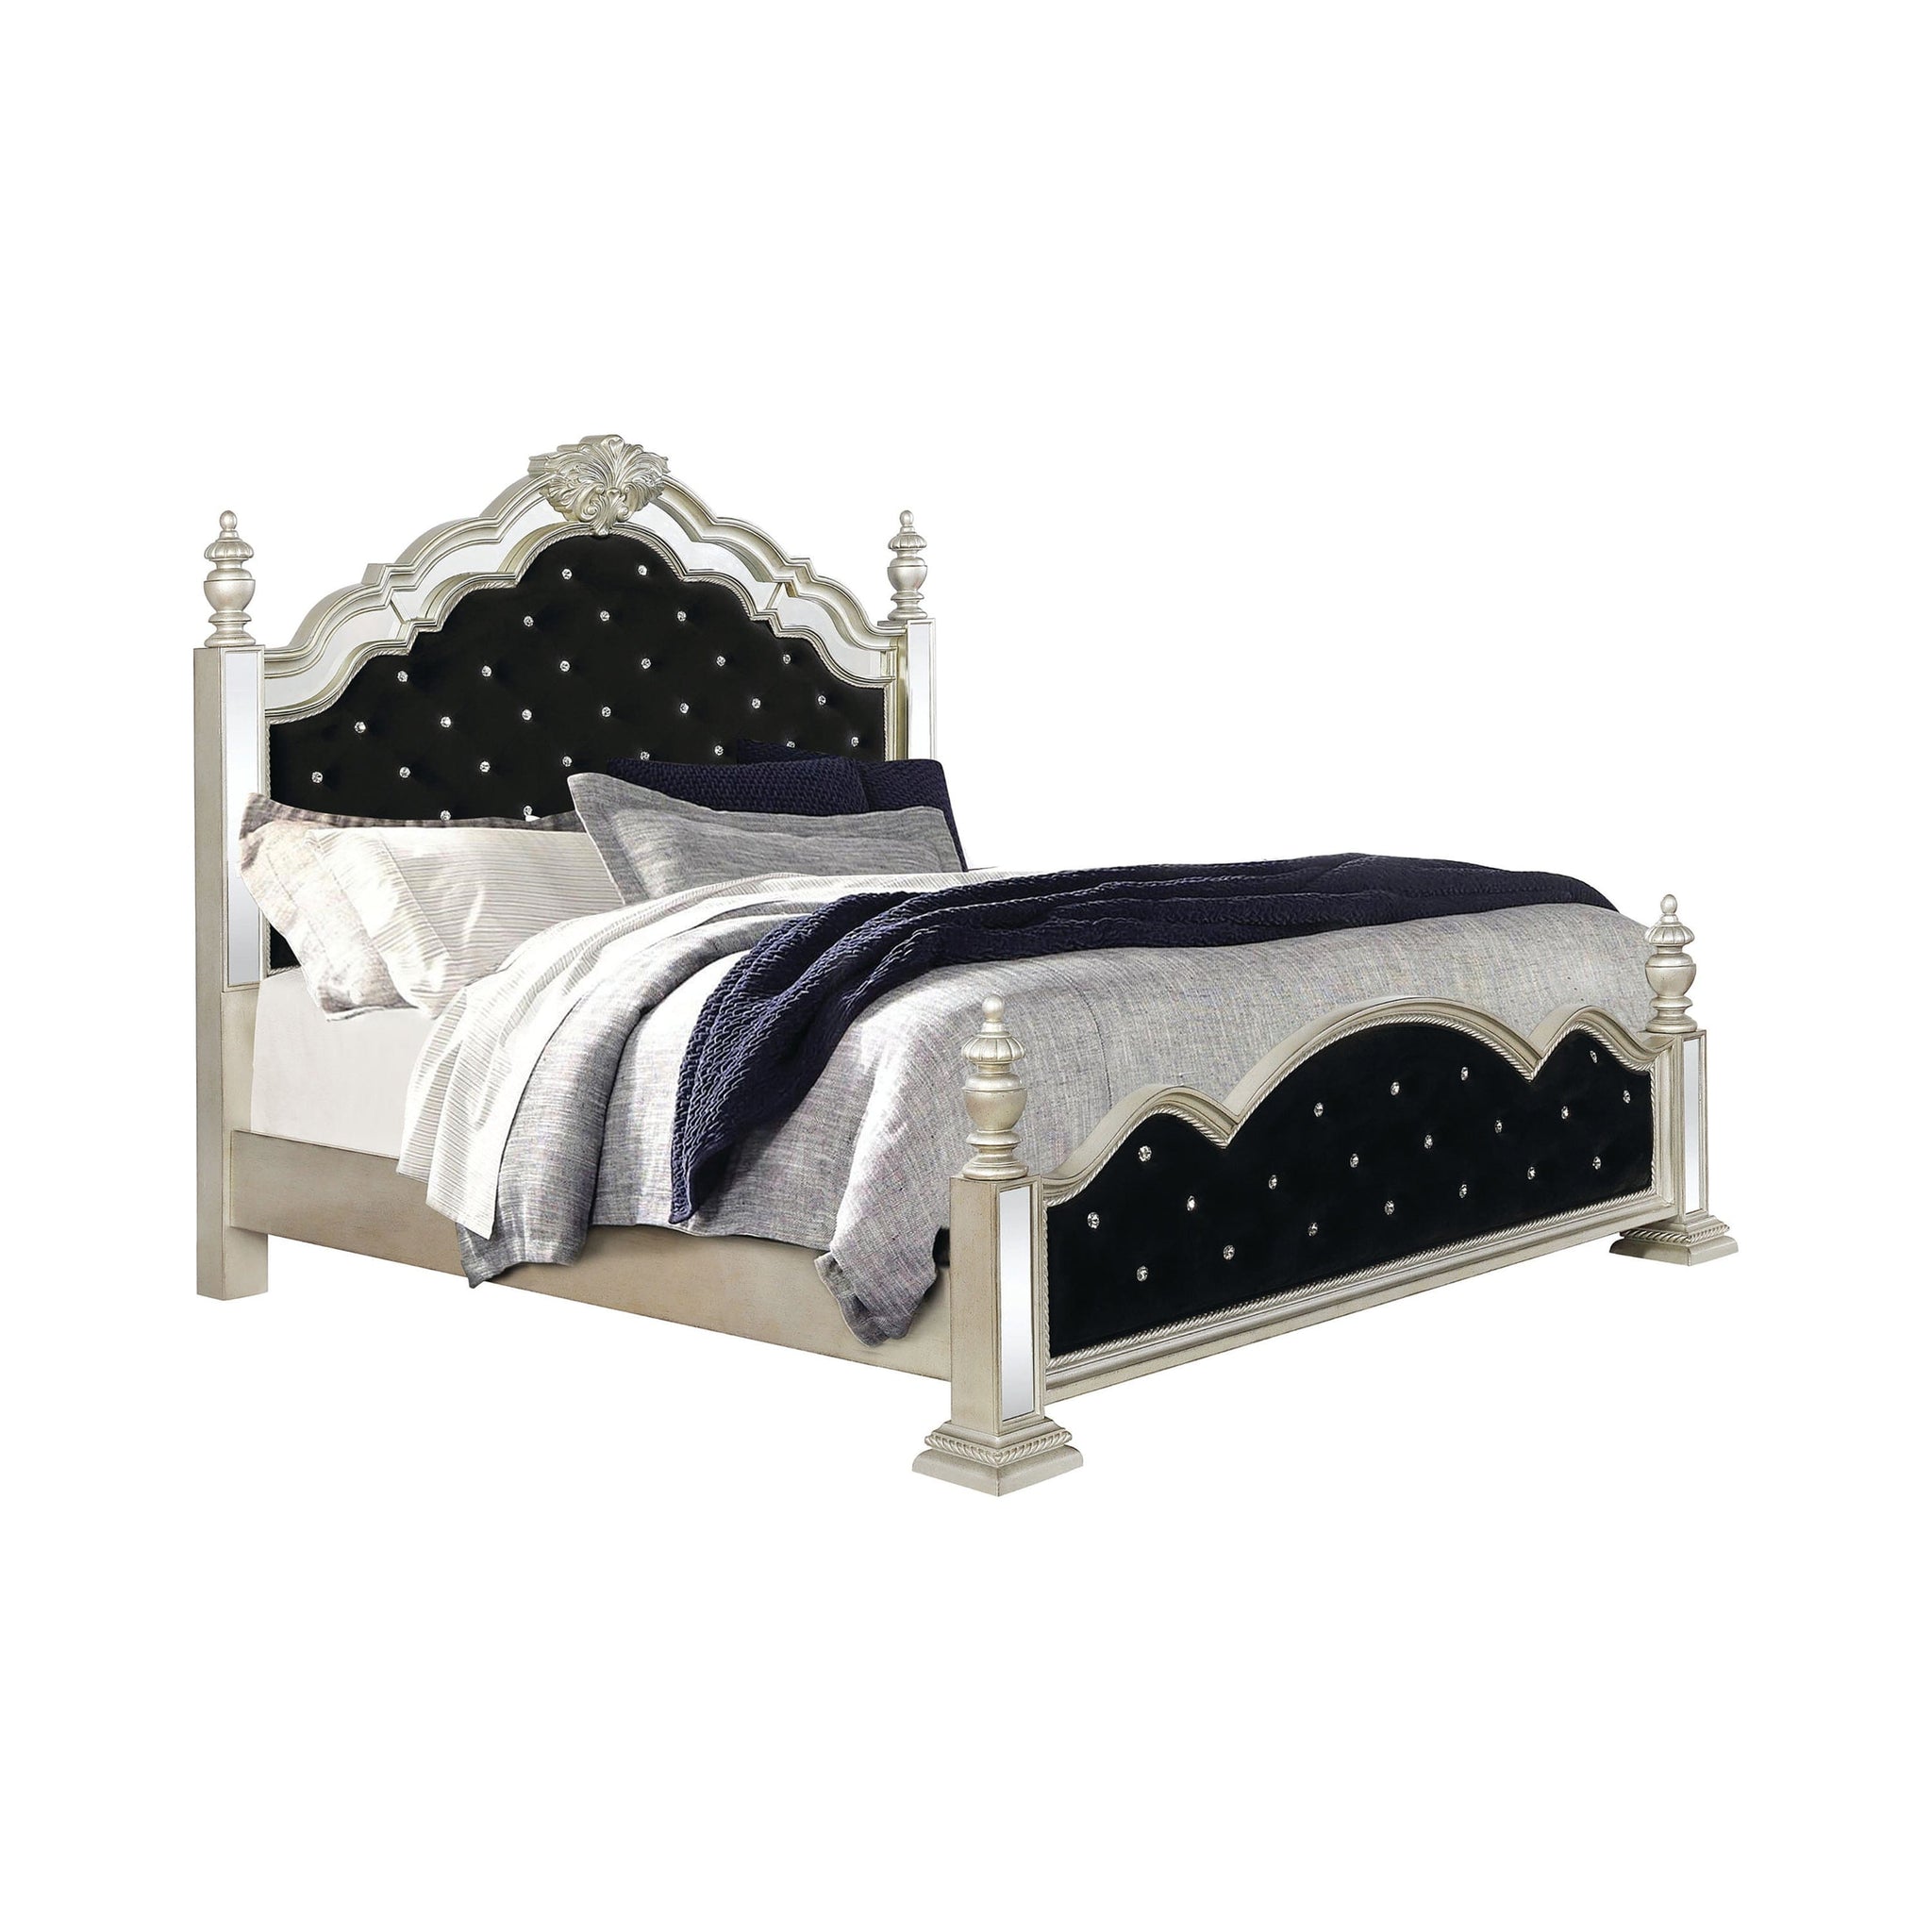 Heidi Queen Upholstered Poster Bed Metallic Platinum Collection, A Glamorous Atmosphere Into The Bedroom, Elegant : Heidi SKU: 222731Q